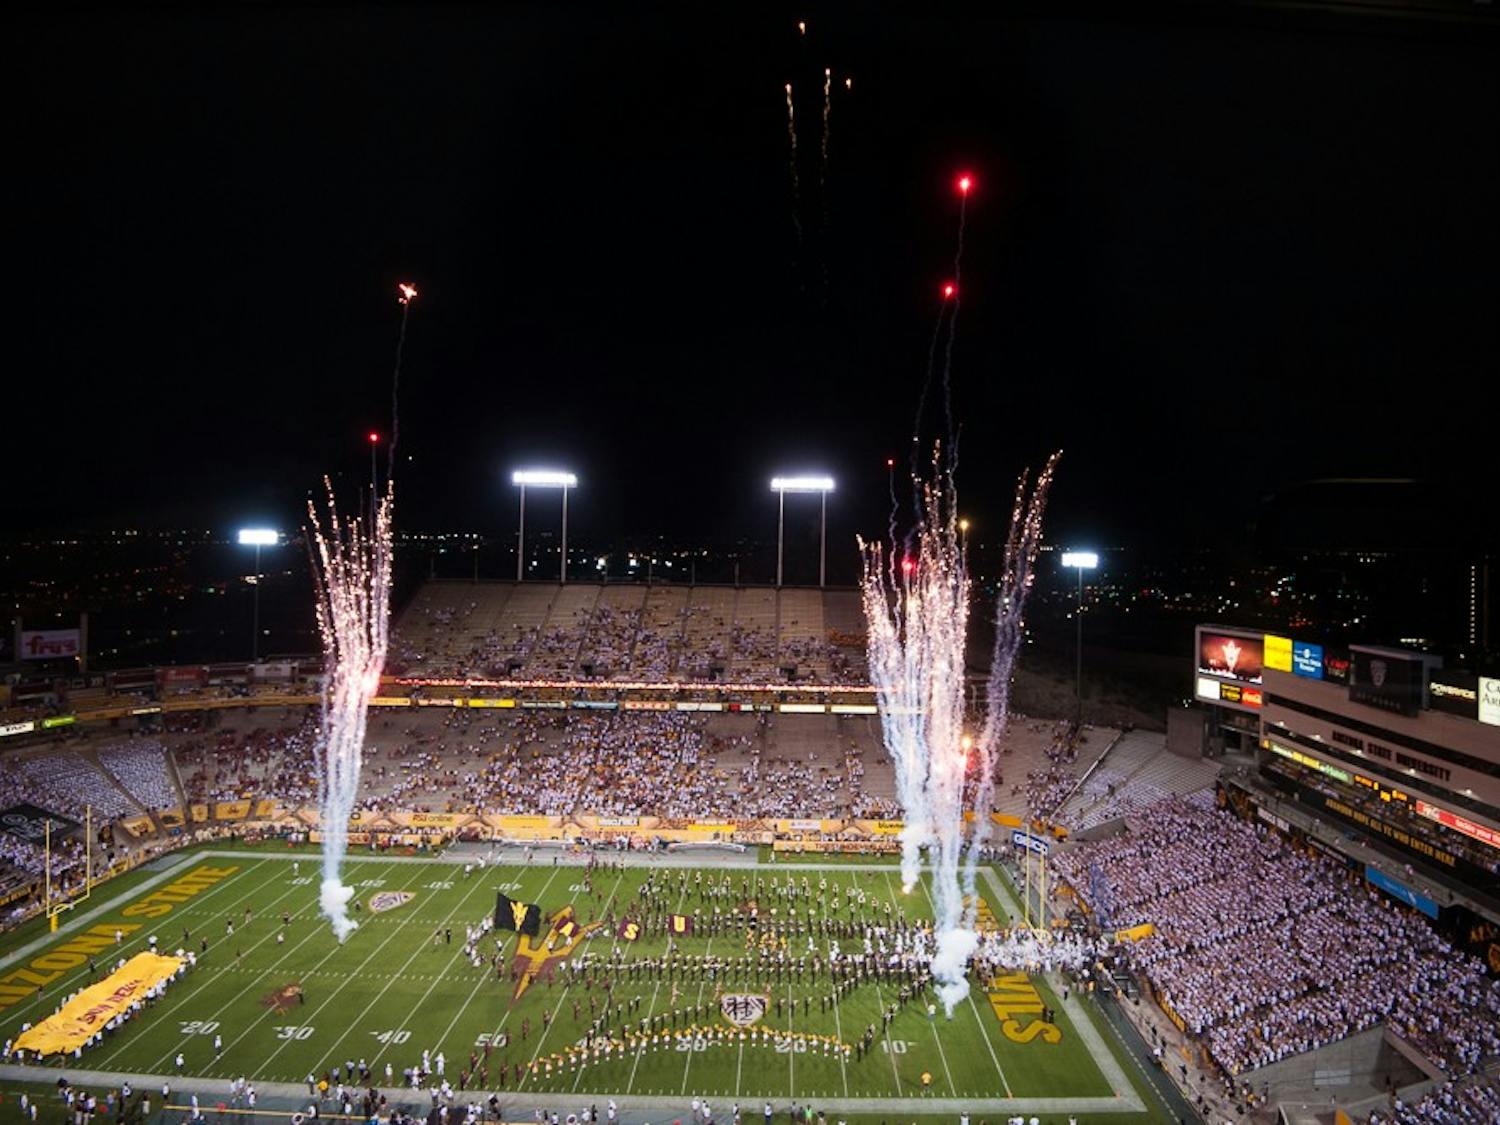 The ASU marching band welcomes the football team to the field before a game against New Mexico on Friday, Sept. 18, 2015, at Sun Devil Stadium in Tempe.